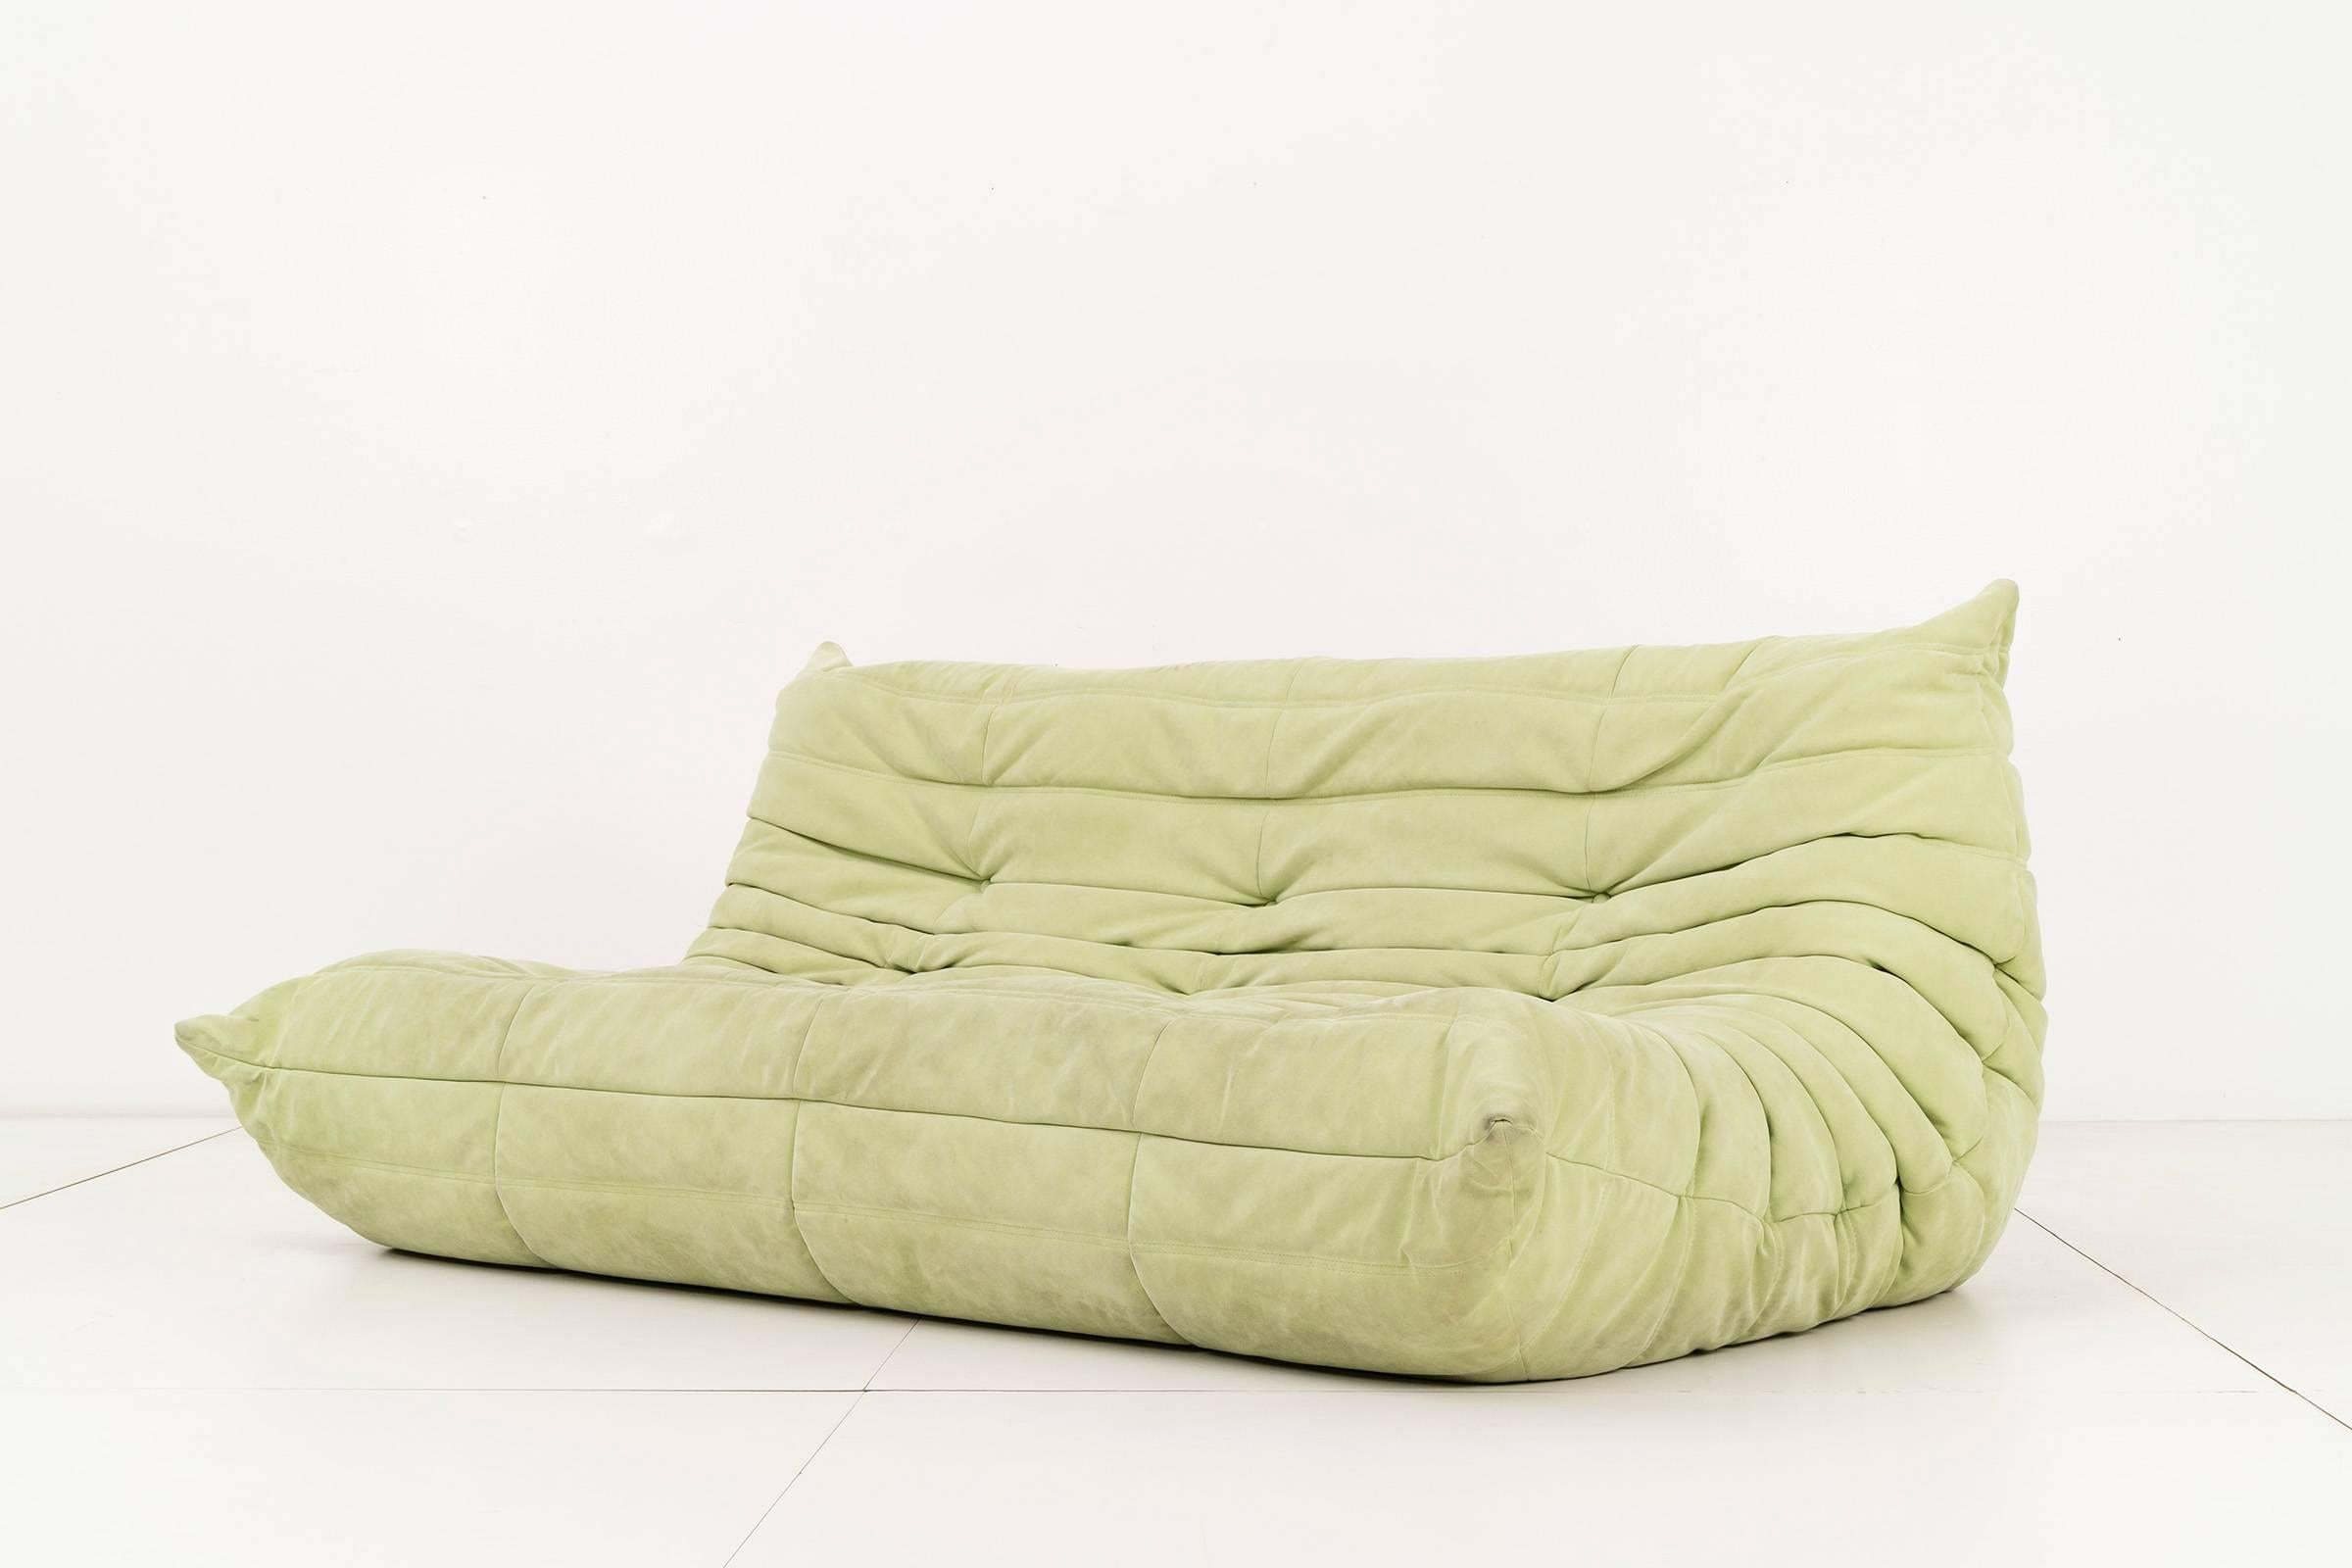 Michel Ducaroy for Ligne Roset. Pair of three-seat sofas upholstered in a faded lime suede. Original label on back [Made In France, Ligne Roset].
 